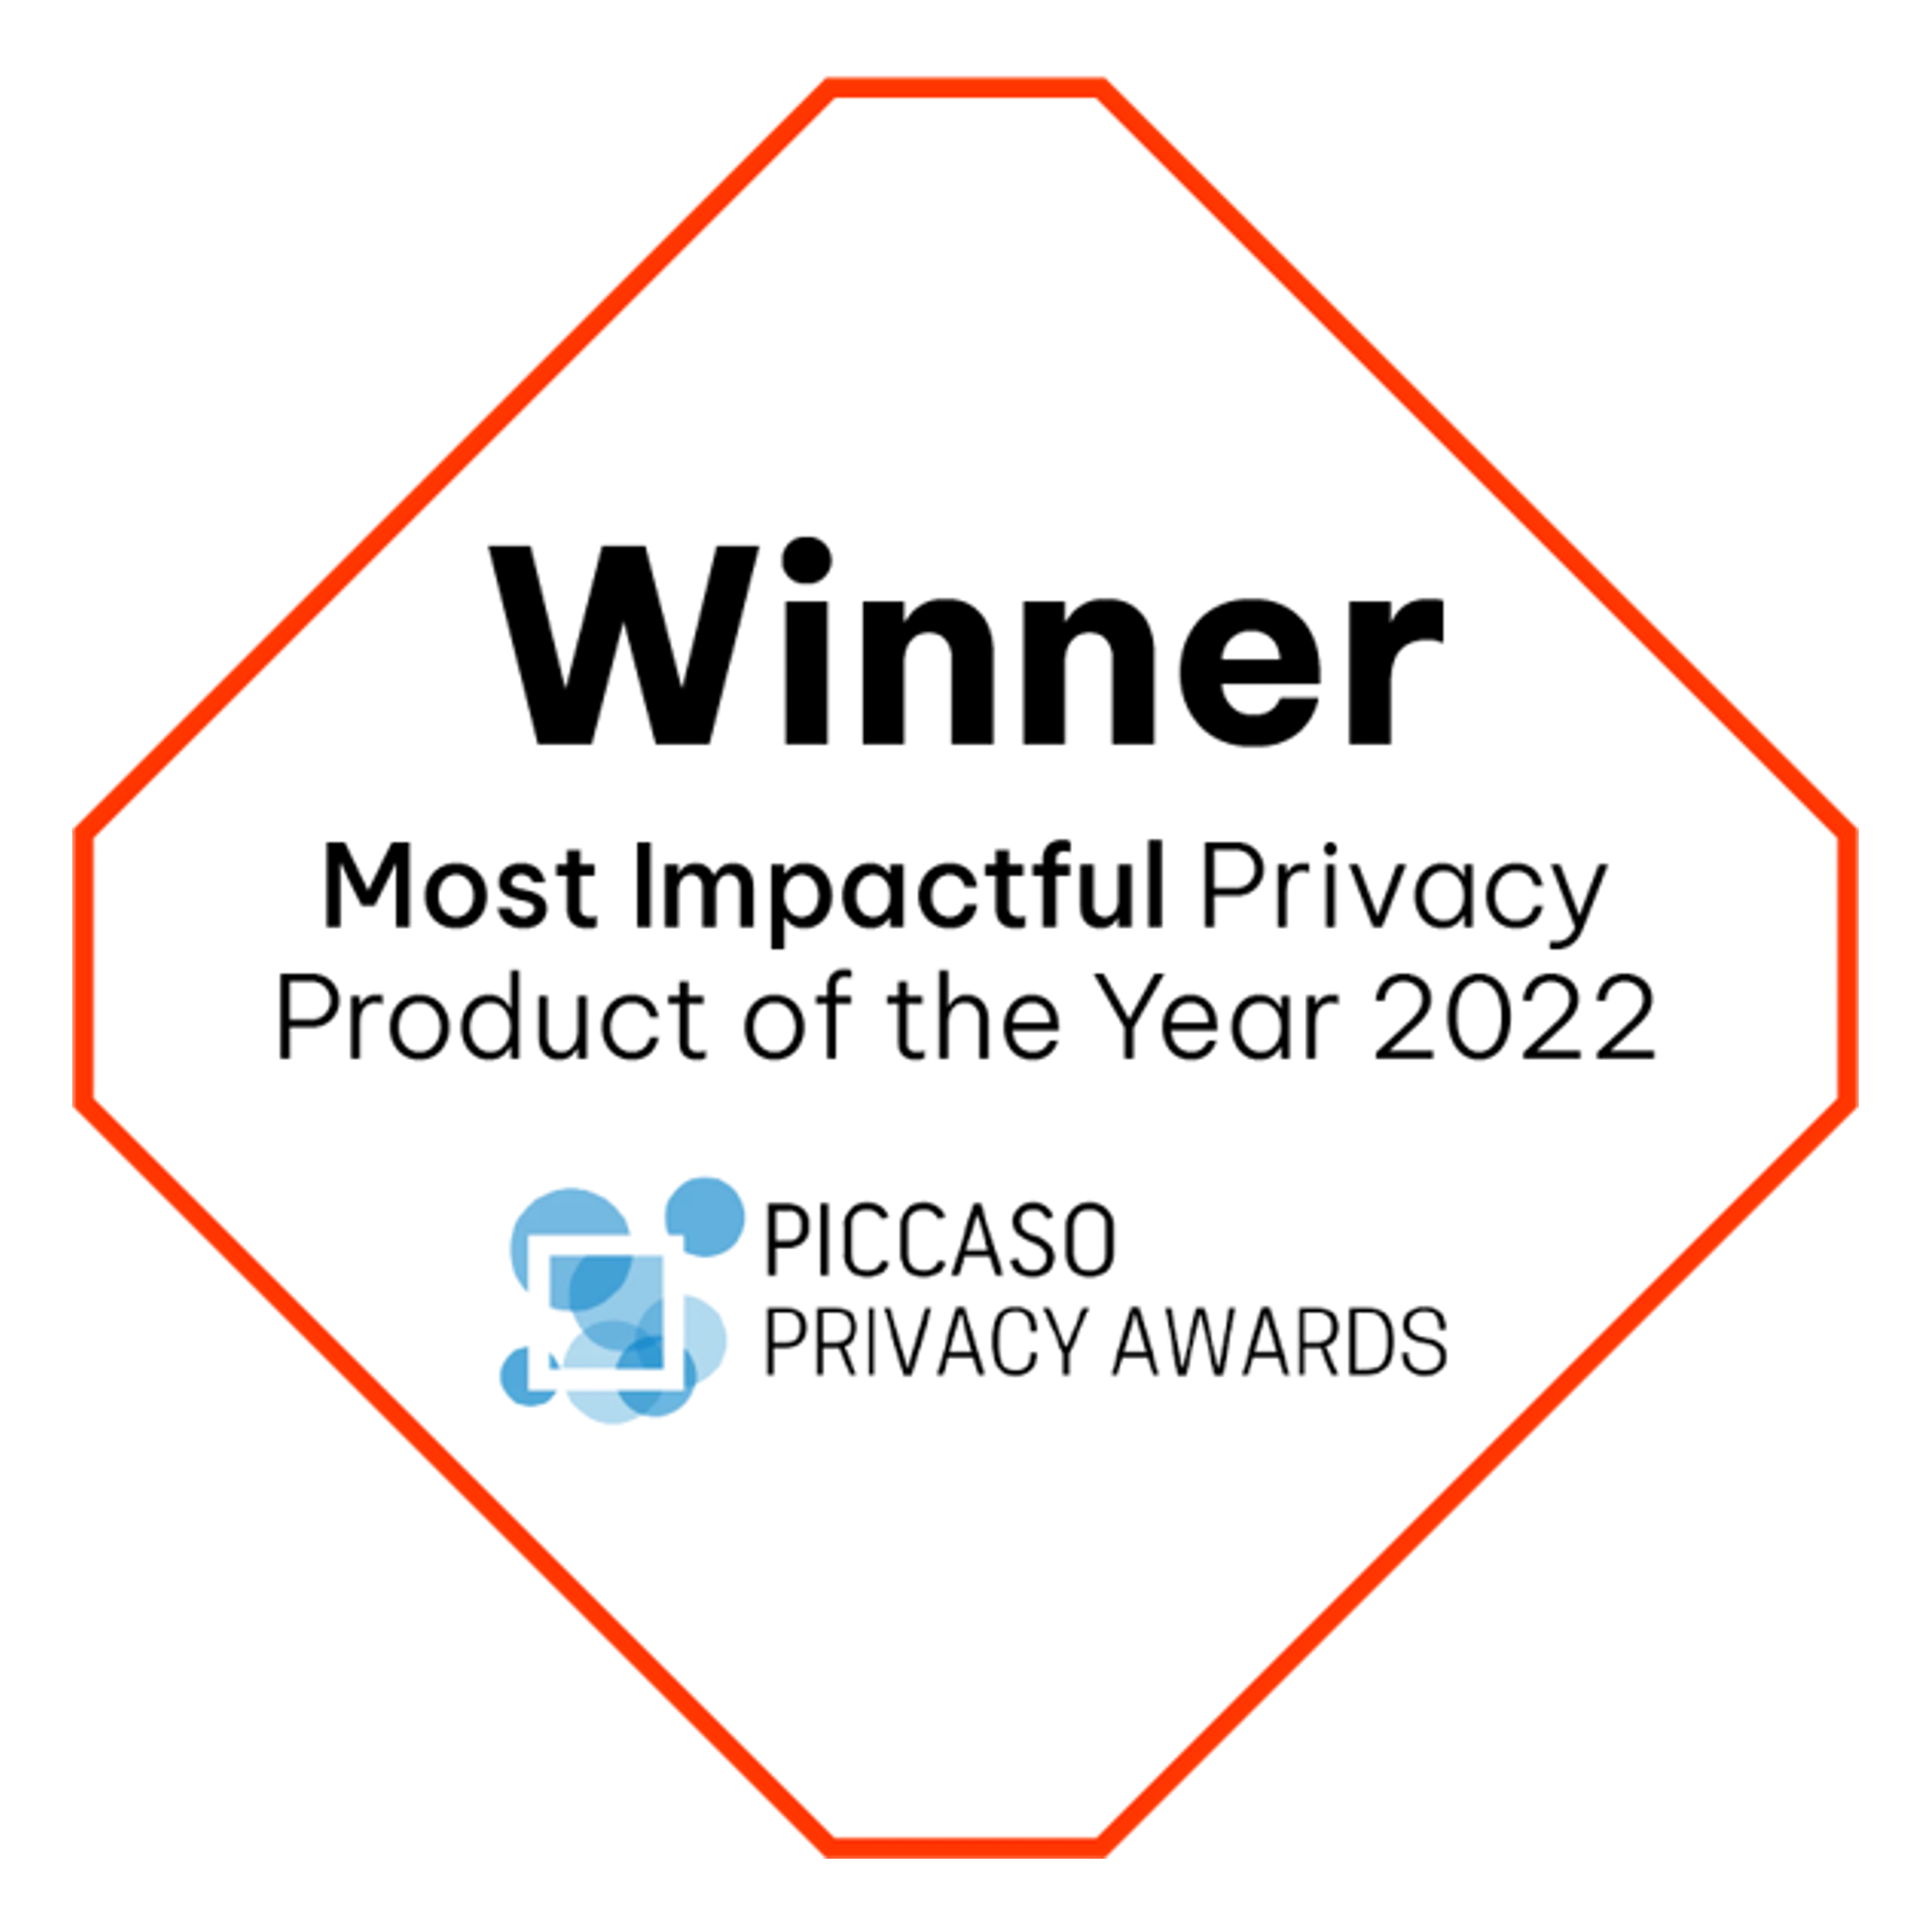 Press release | Zivver Named as Most Impactful Privacy Product of the Year at PICCASO Privacy Awards 2022